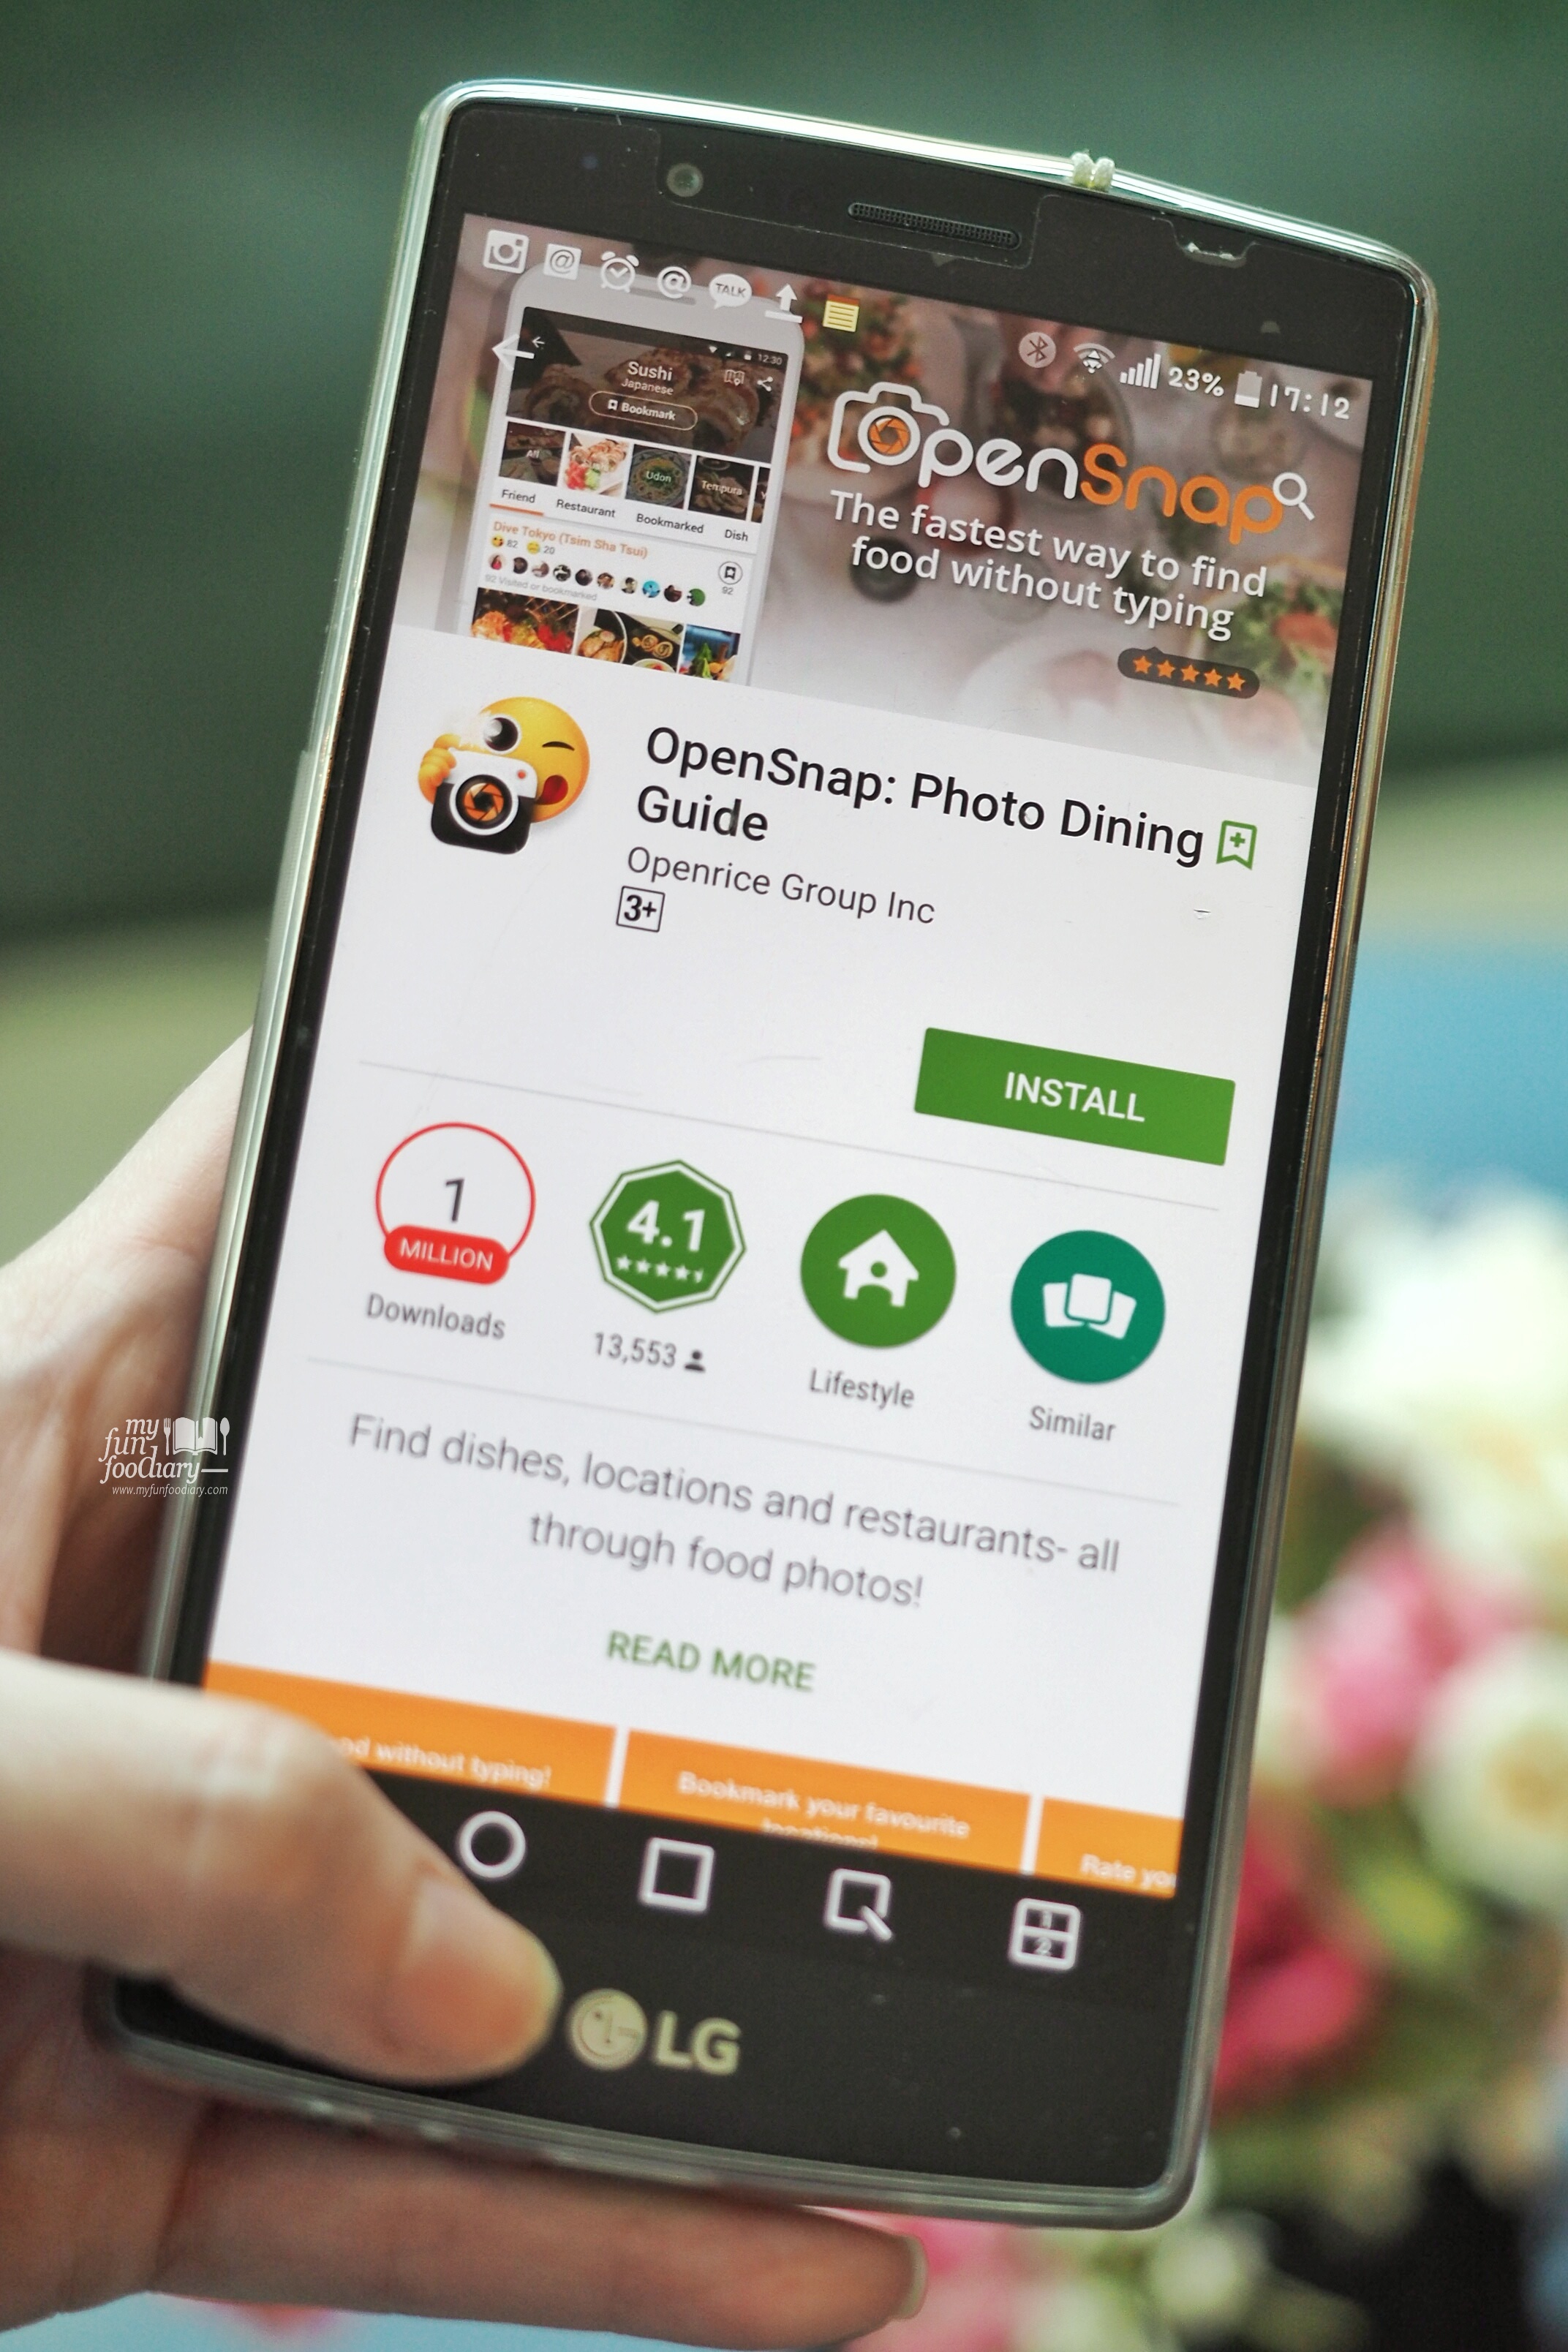 Installing Open Snap on my Android Phone by Myfunfoodiary